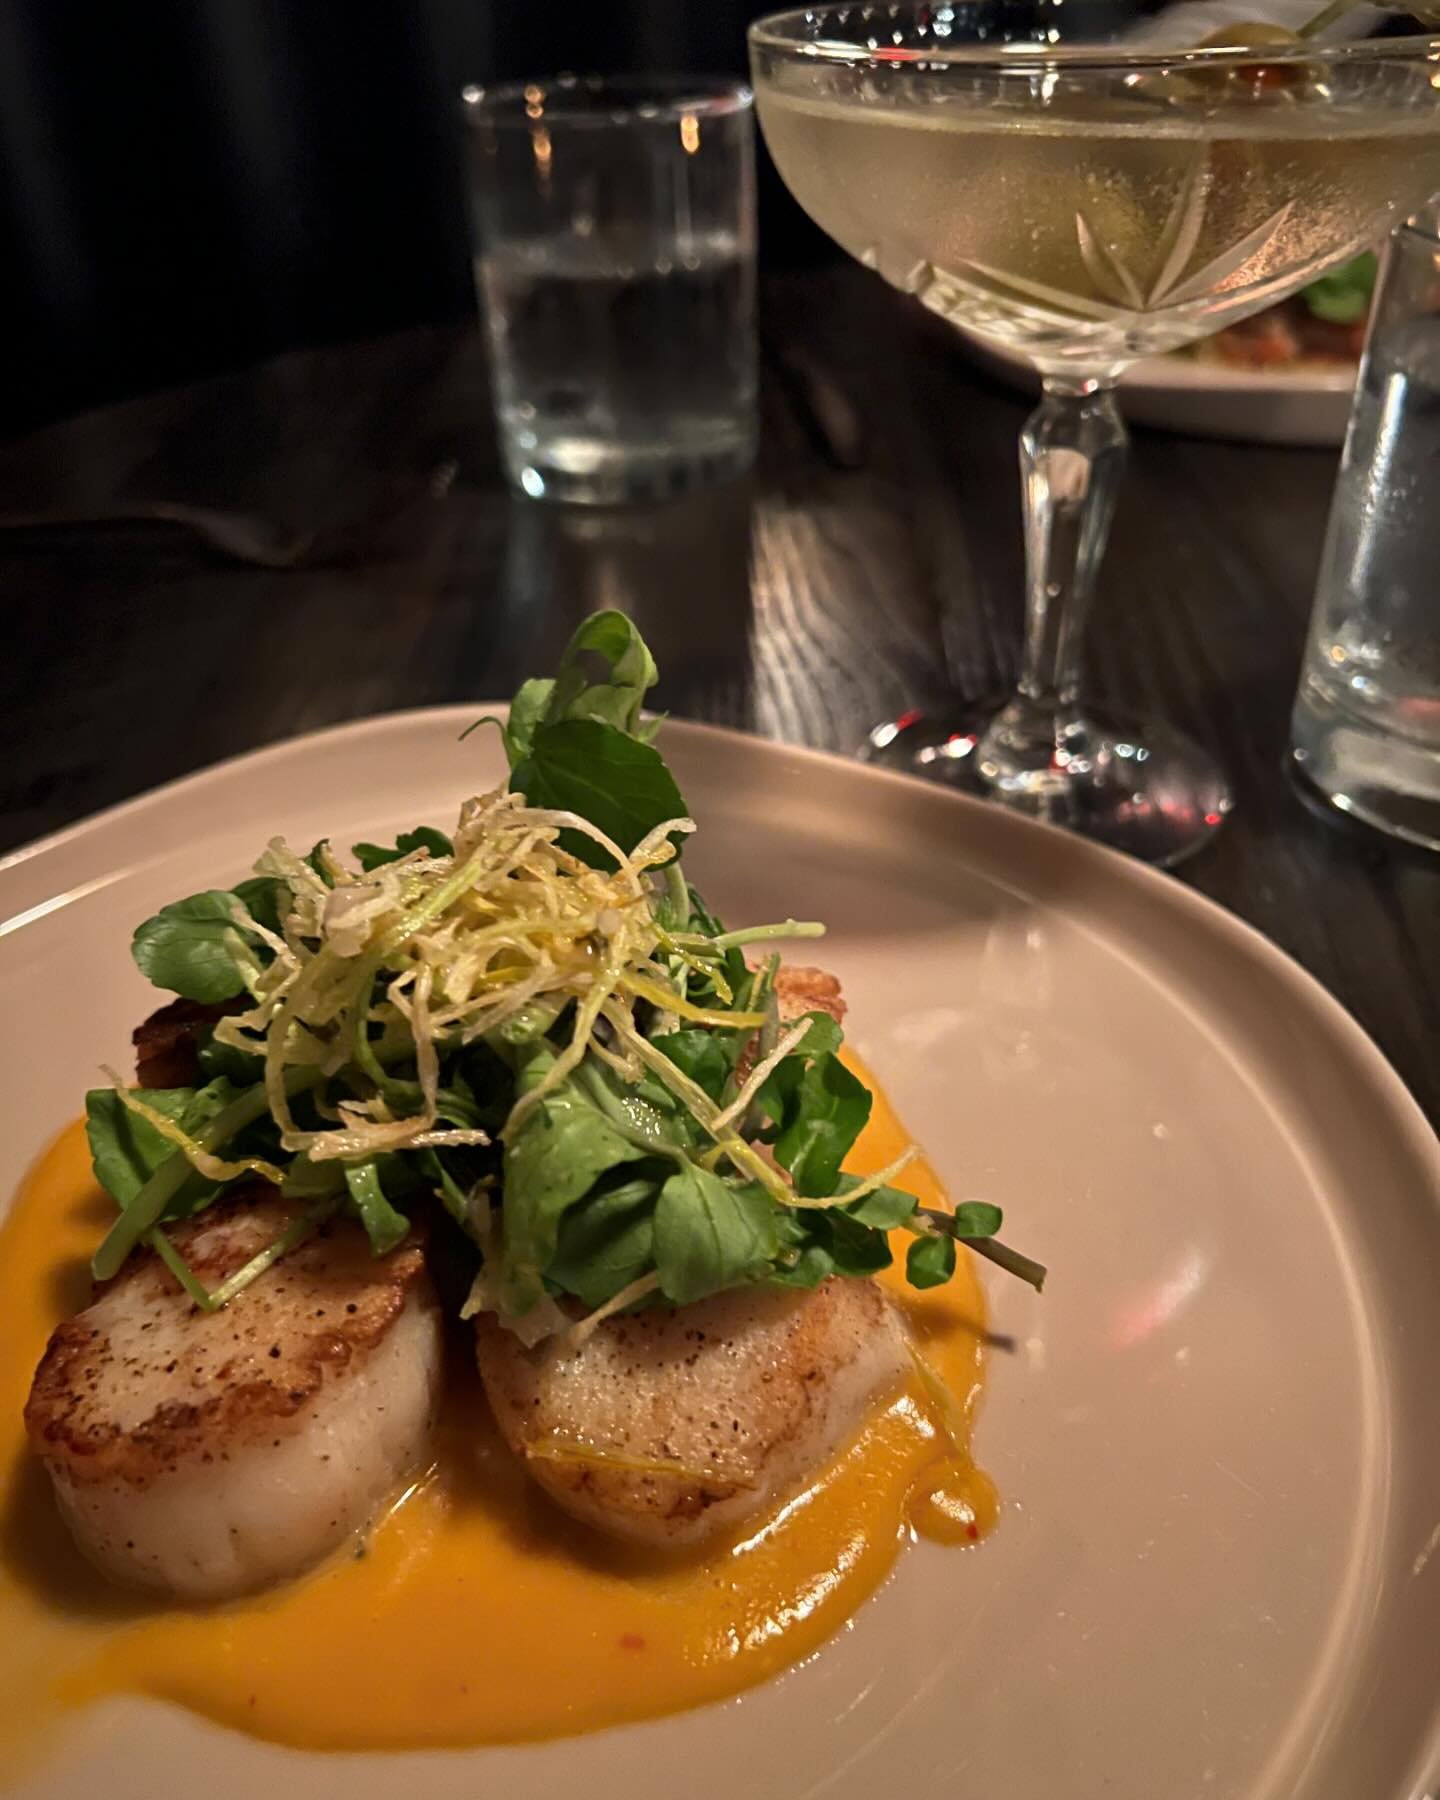 Our Seafood is Saintly. Try our perfectly Seared Diver Scallops with Nduja Beurre Blanc and a side of @titosvodka Martini at The Saint.